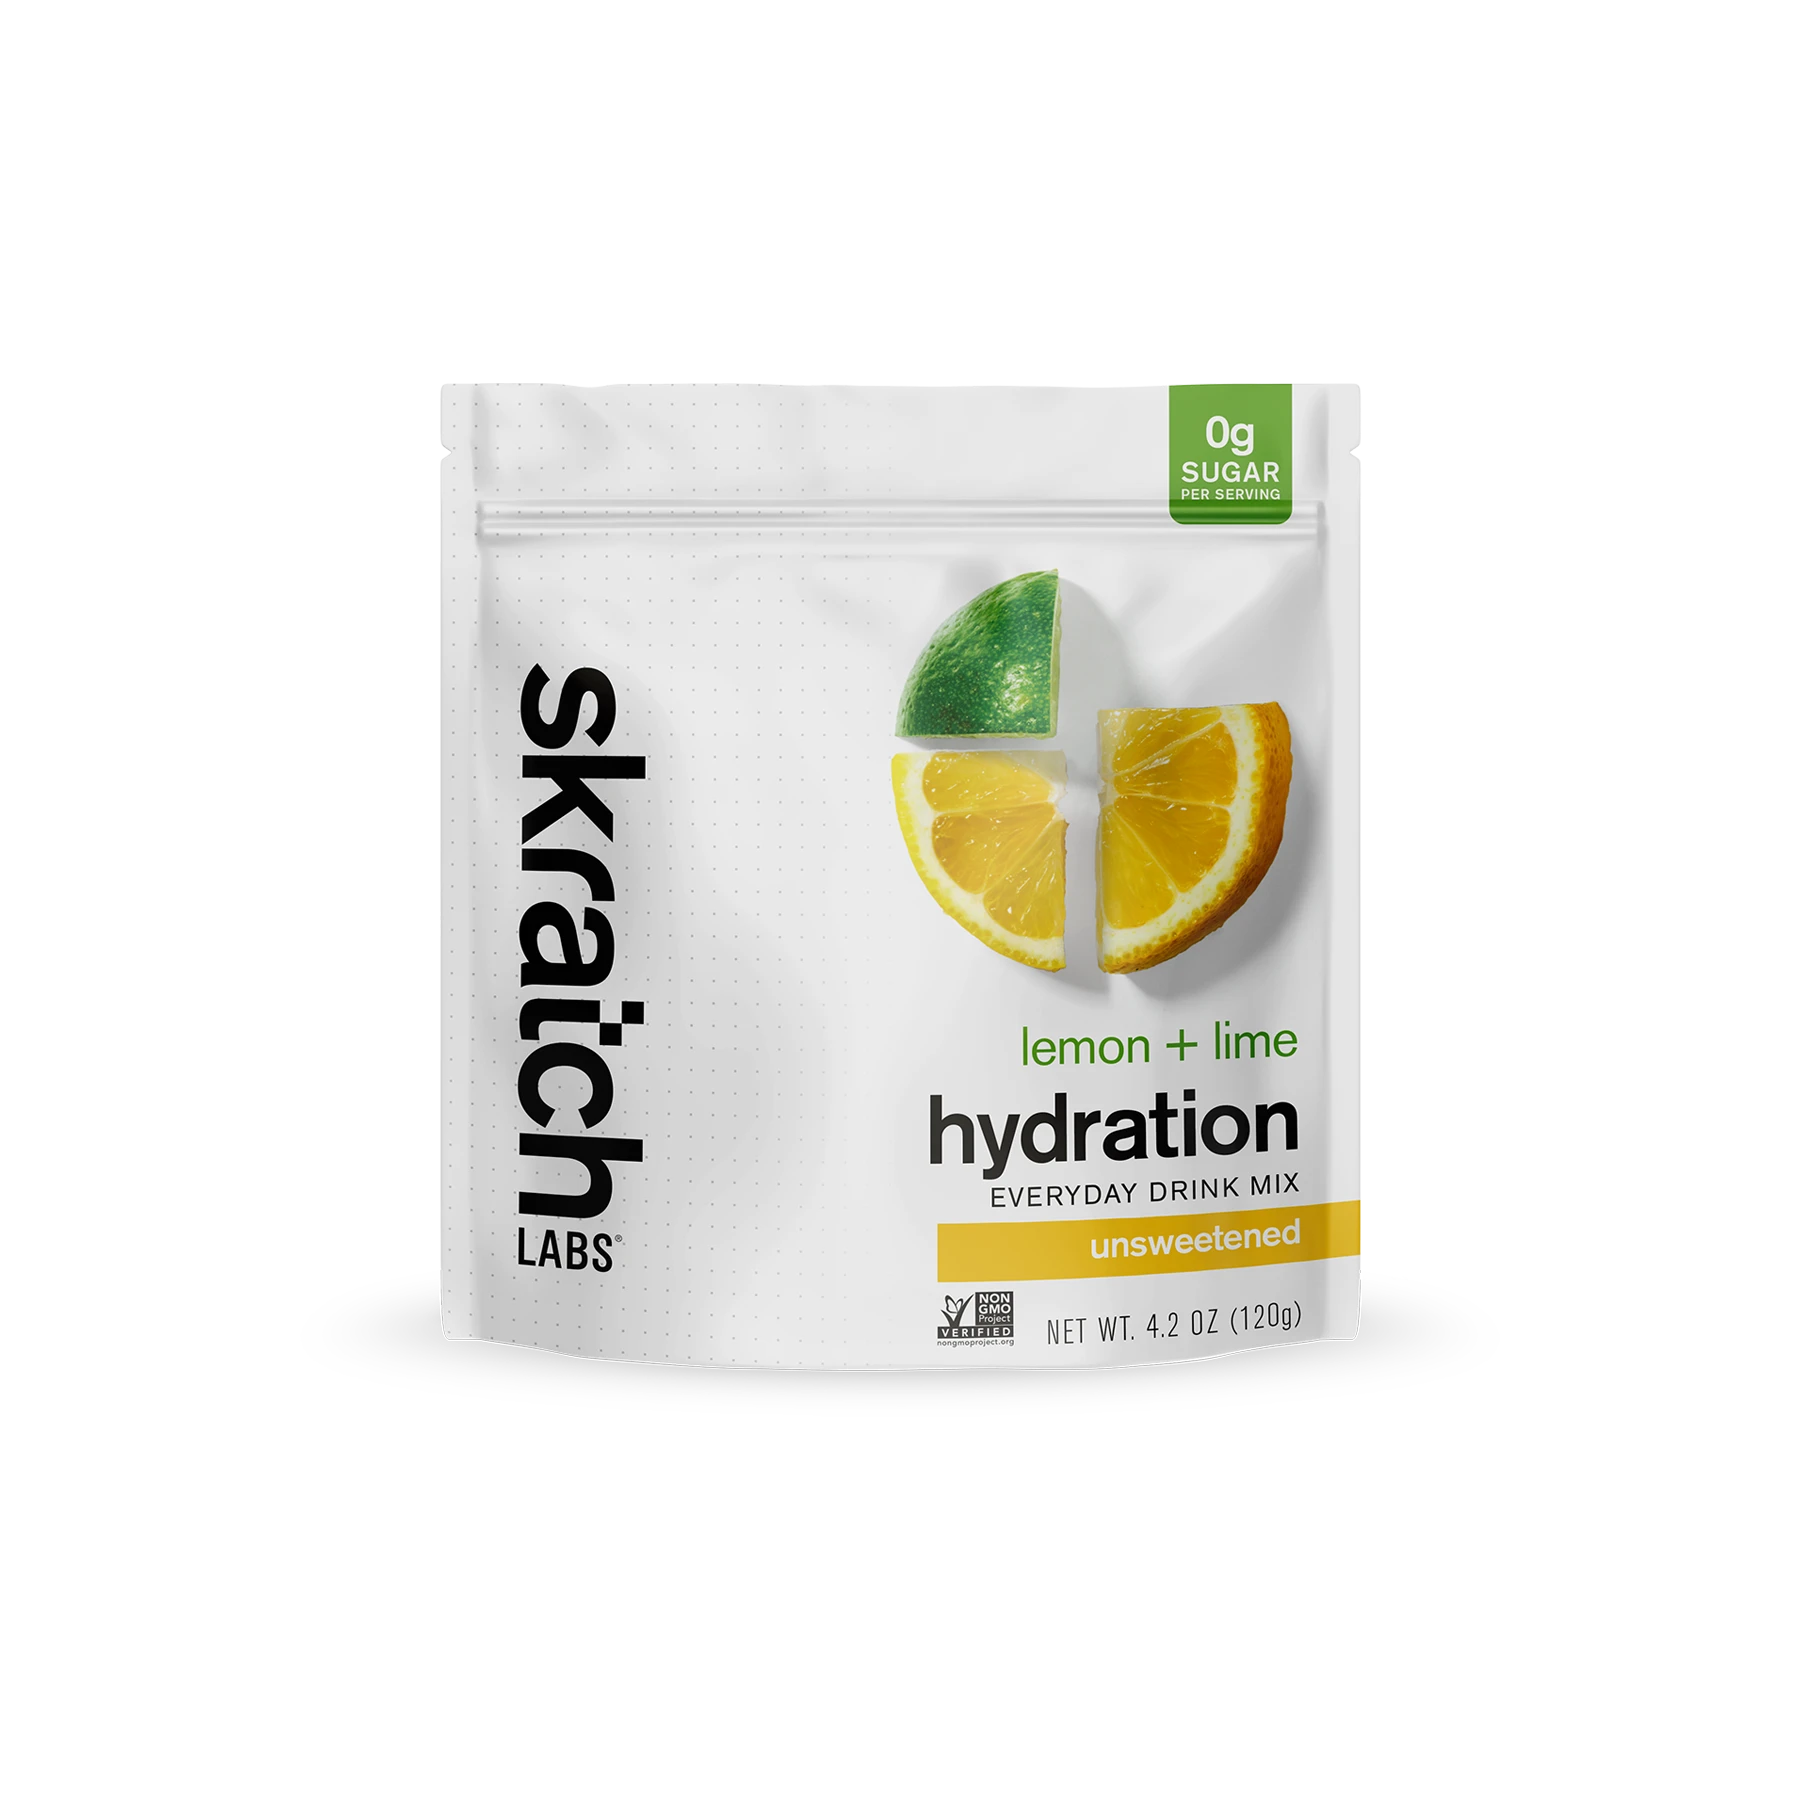 Skratch Labs Every Day Drink Mix Lemon + Lime